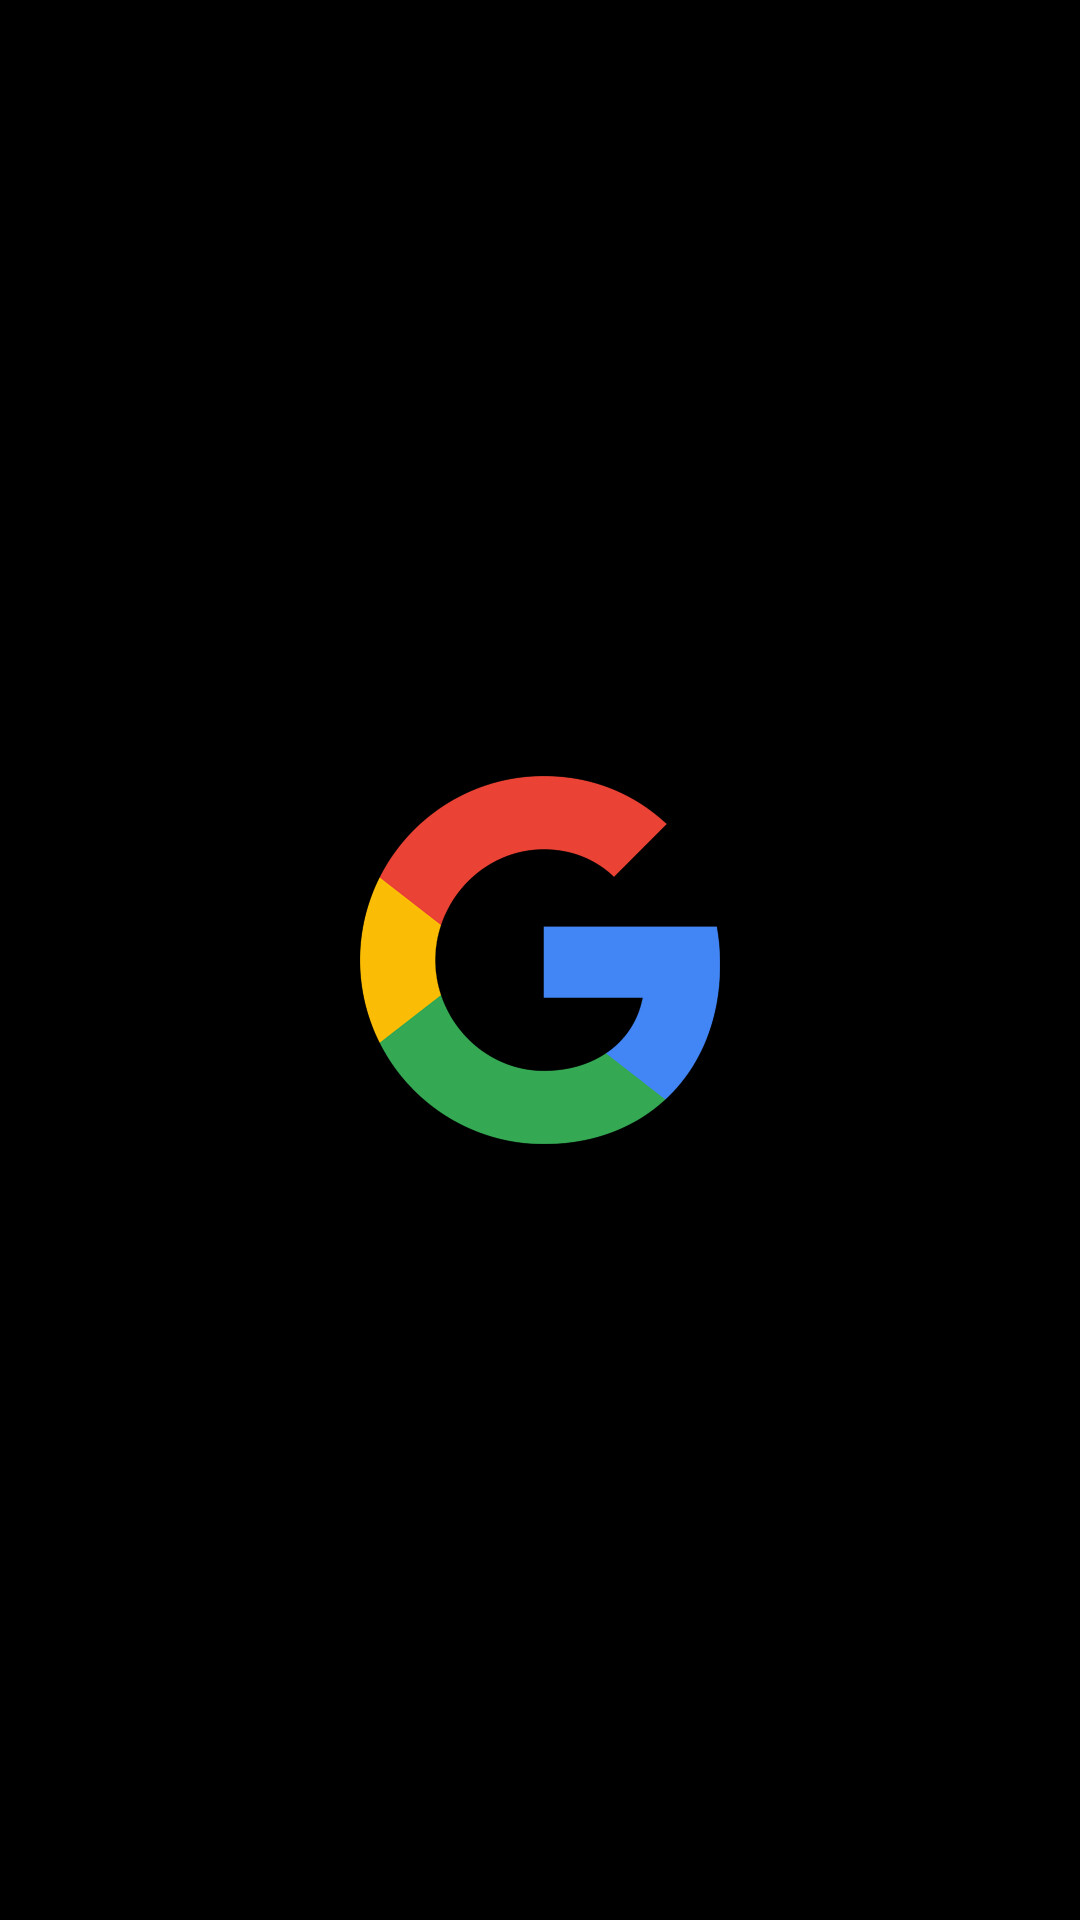 Google: A holding company for Alphabet's Internet properties and interests. 1080x1920 Full HD Wallpaper.